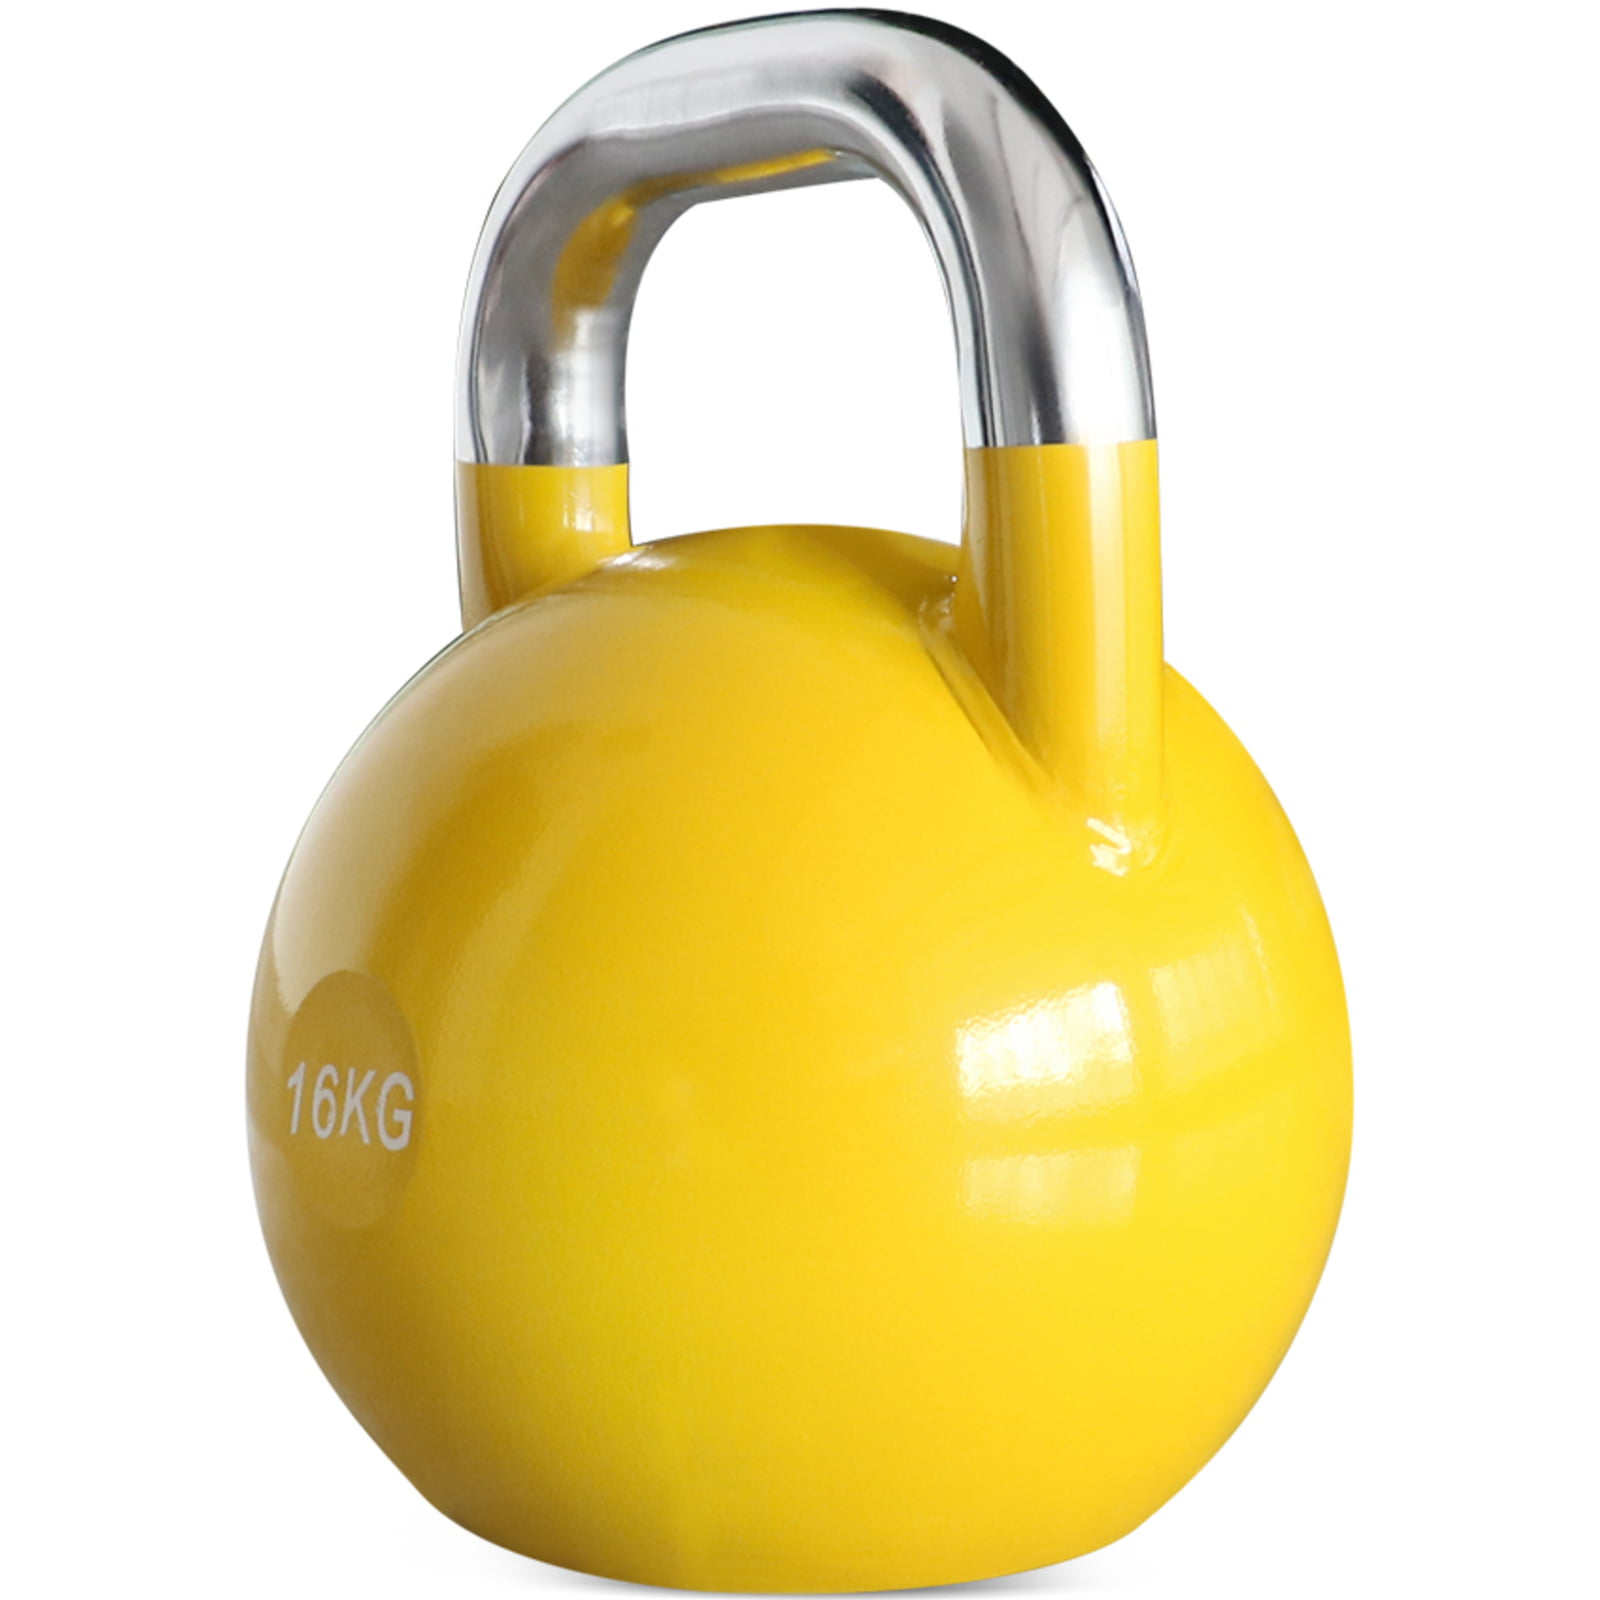 HC1310145 - Fitness Mad Kettlebell - Yellow - 6kg